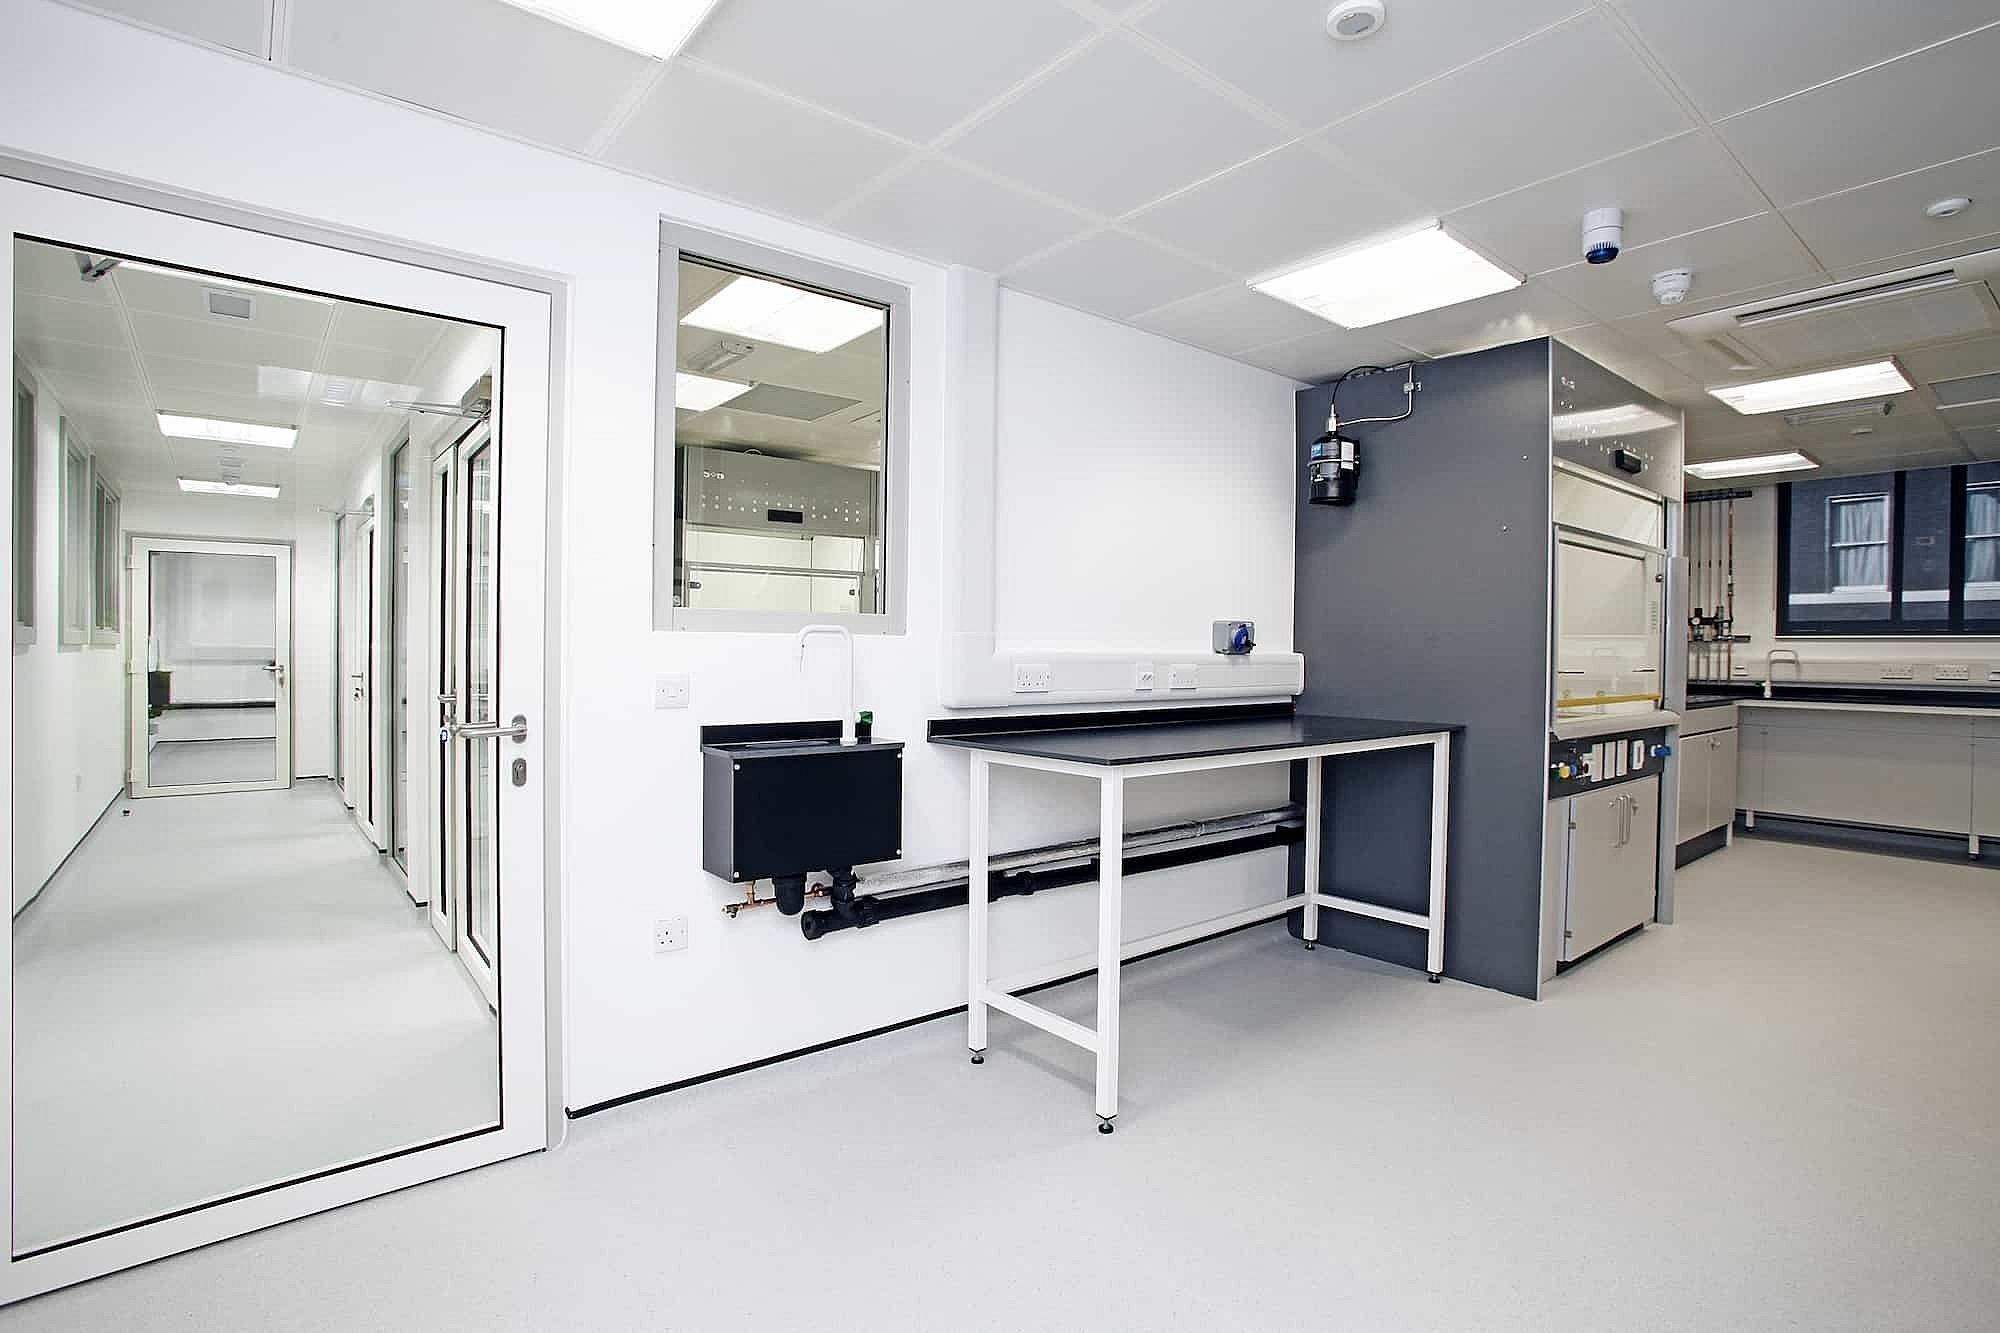 UCL laboratory fit out